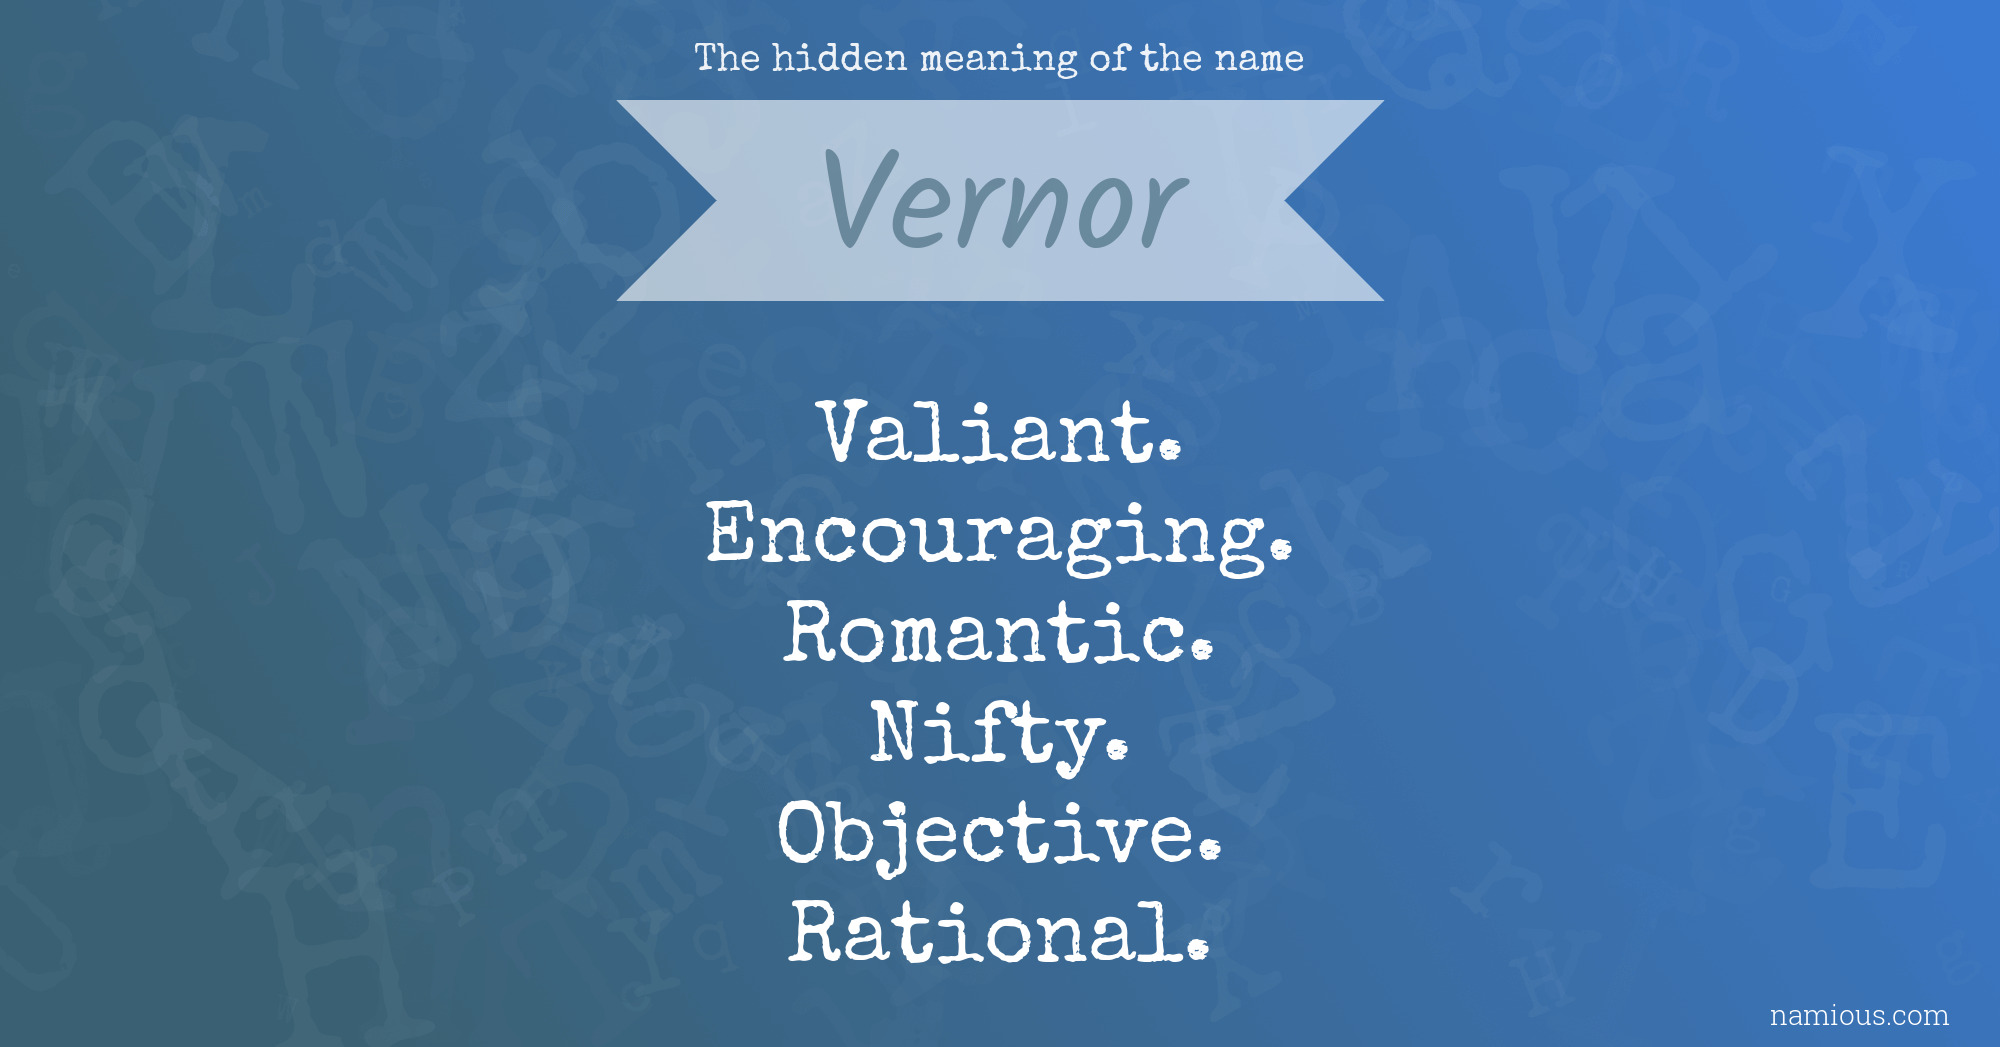 The hidden meaning of the name Vernor